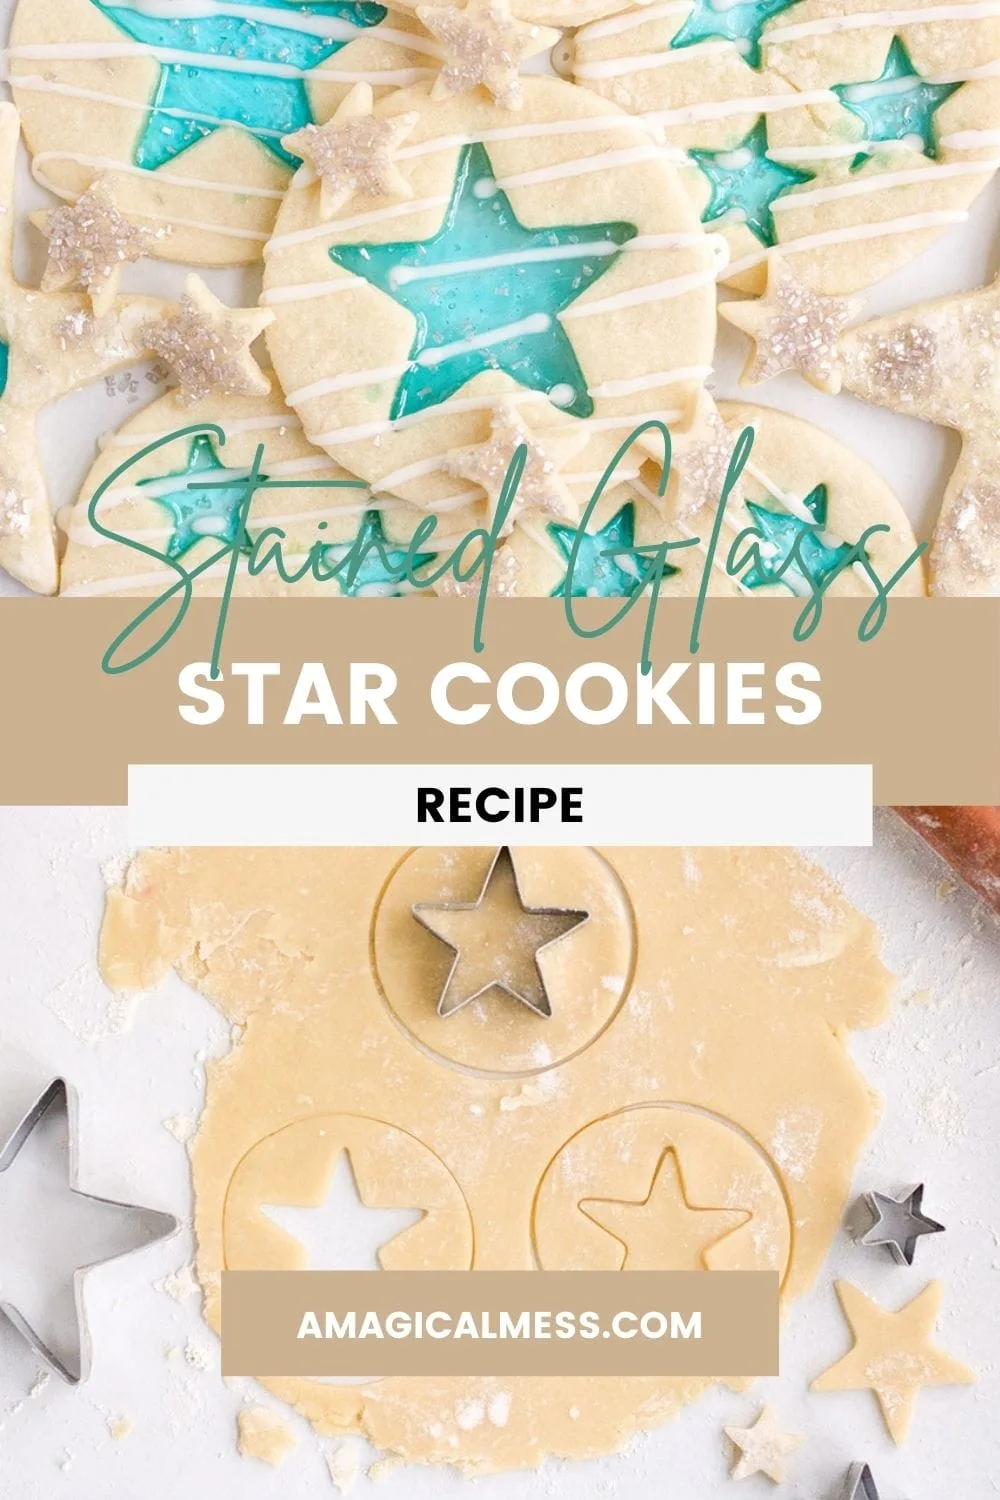 Cookie dough and baked stained-glass cookies with stars